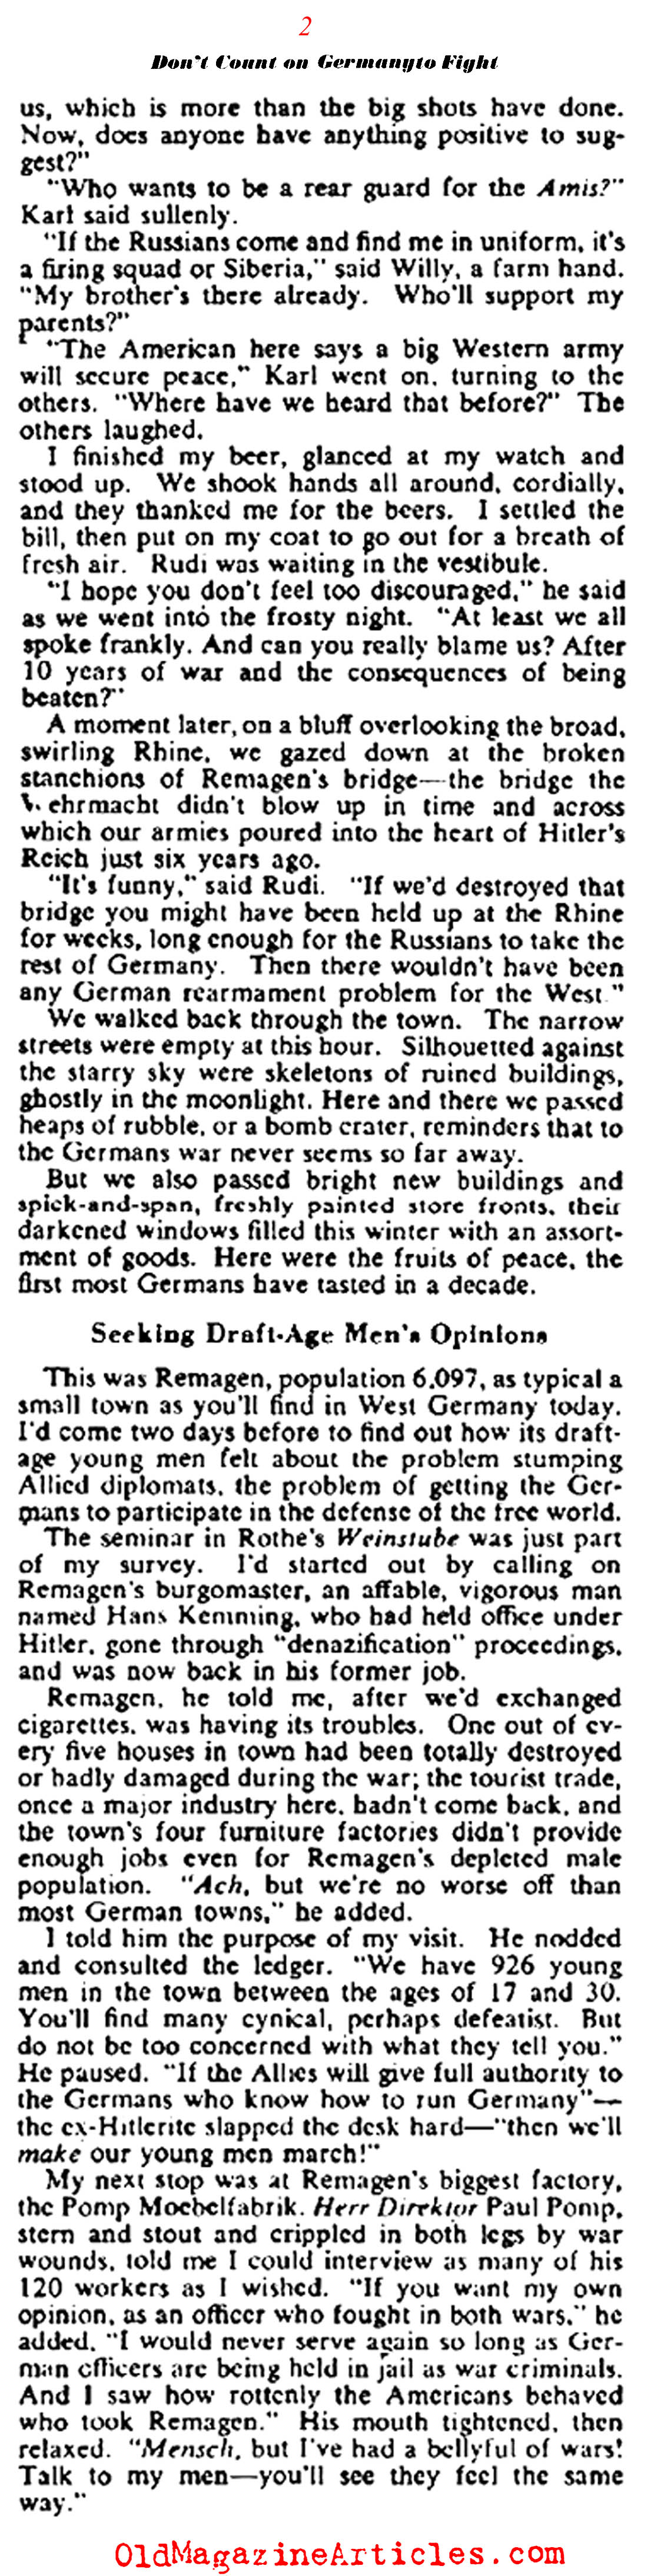 ''Don't Count on Germany to Fight'' (Collier's Magazine, 1951)